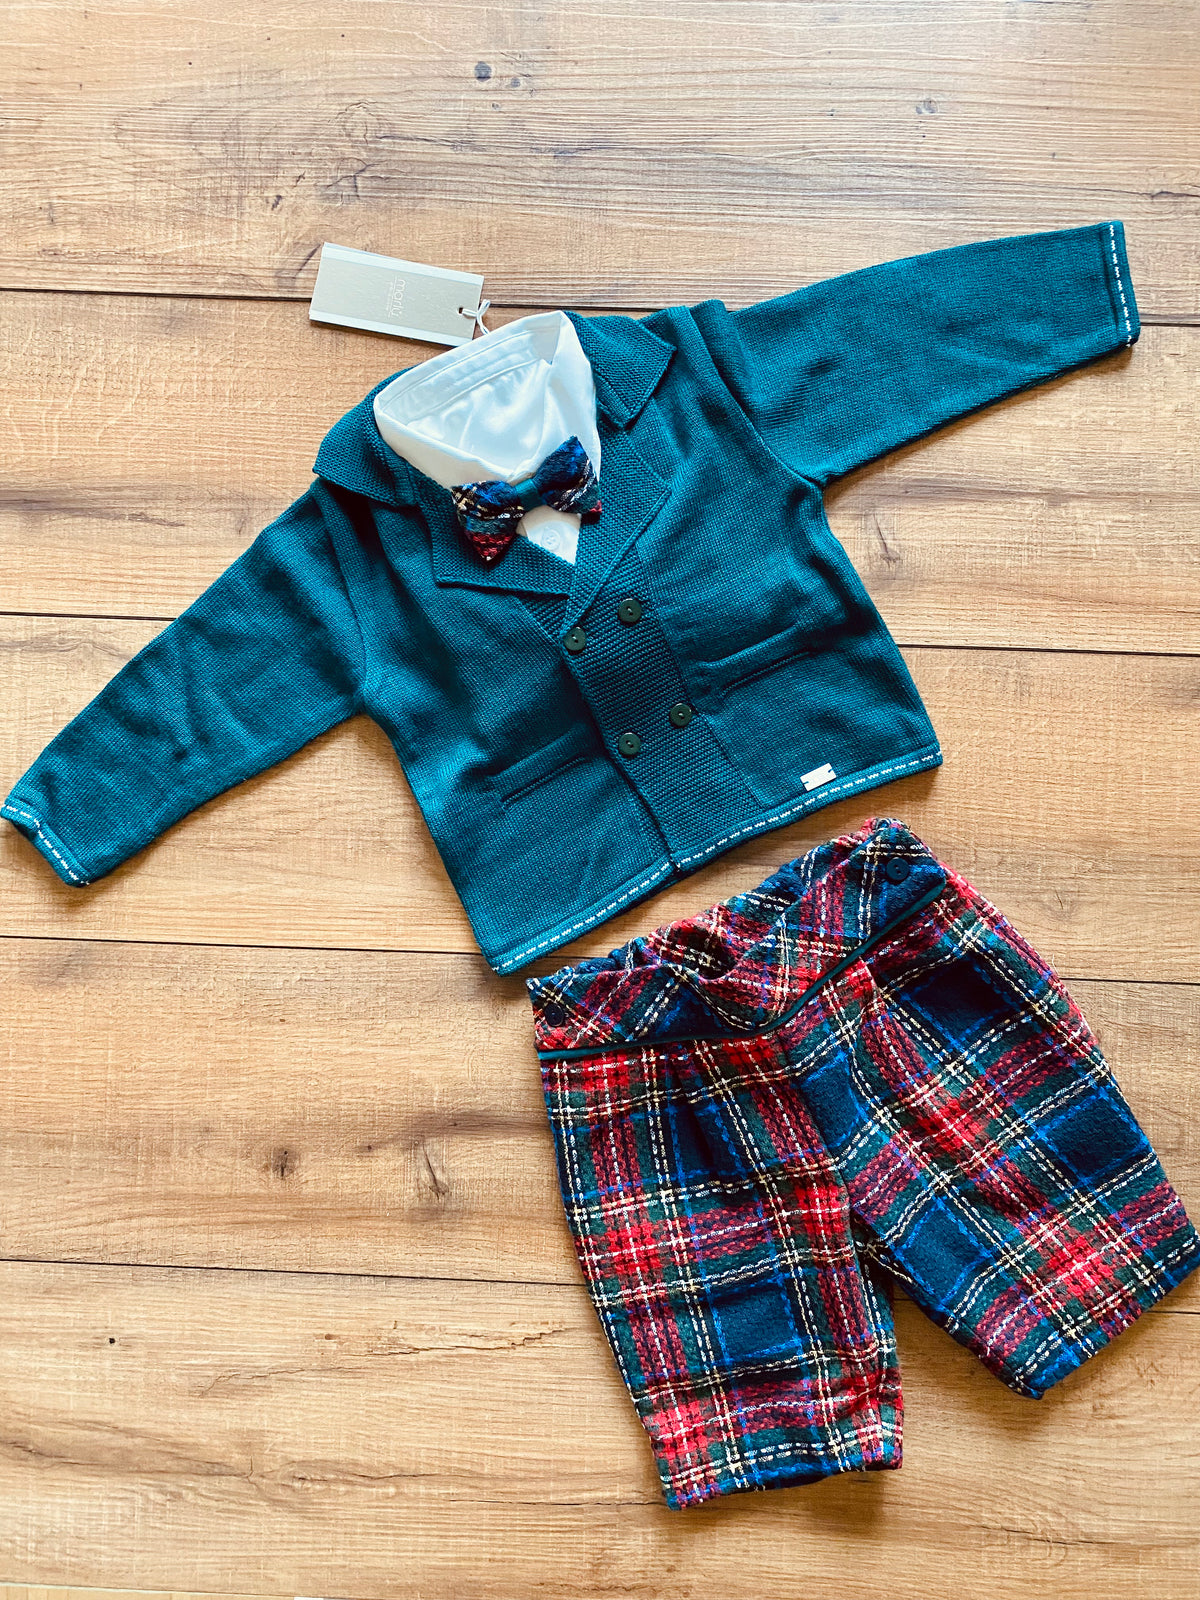 Christmas Ceremony dress for him - NEW Marlu°® winter collection